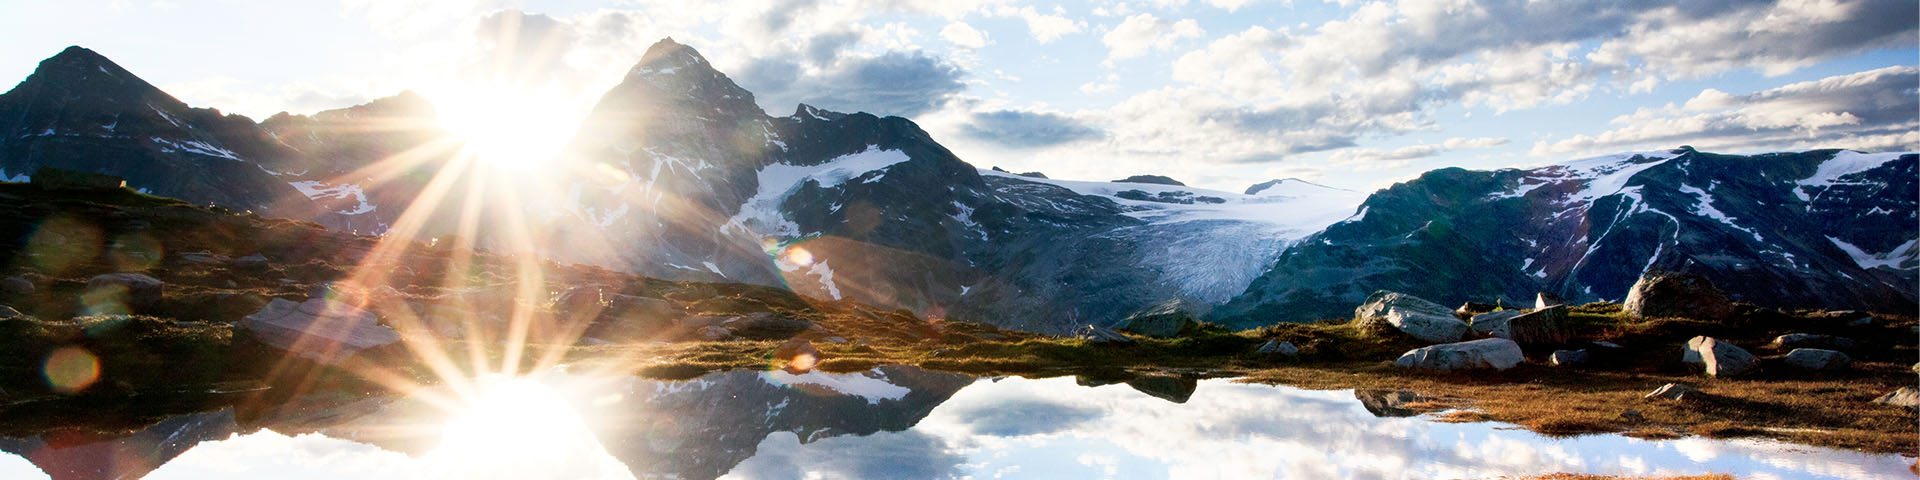 Sunrise at an alpine lake with a mountainous and glacial backdrop